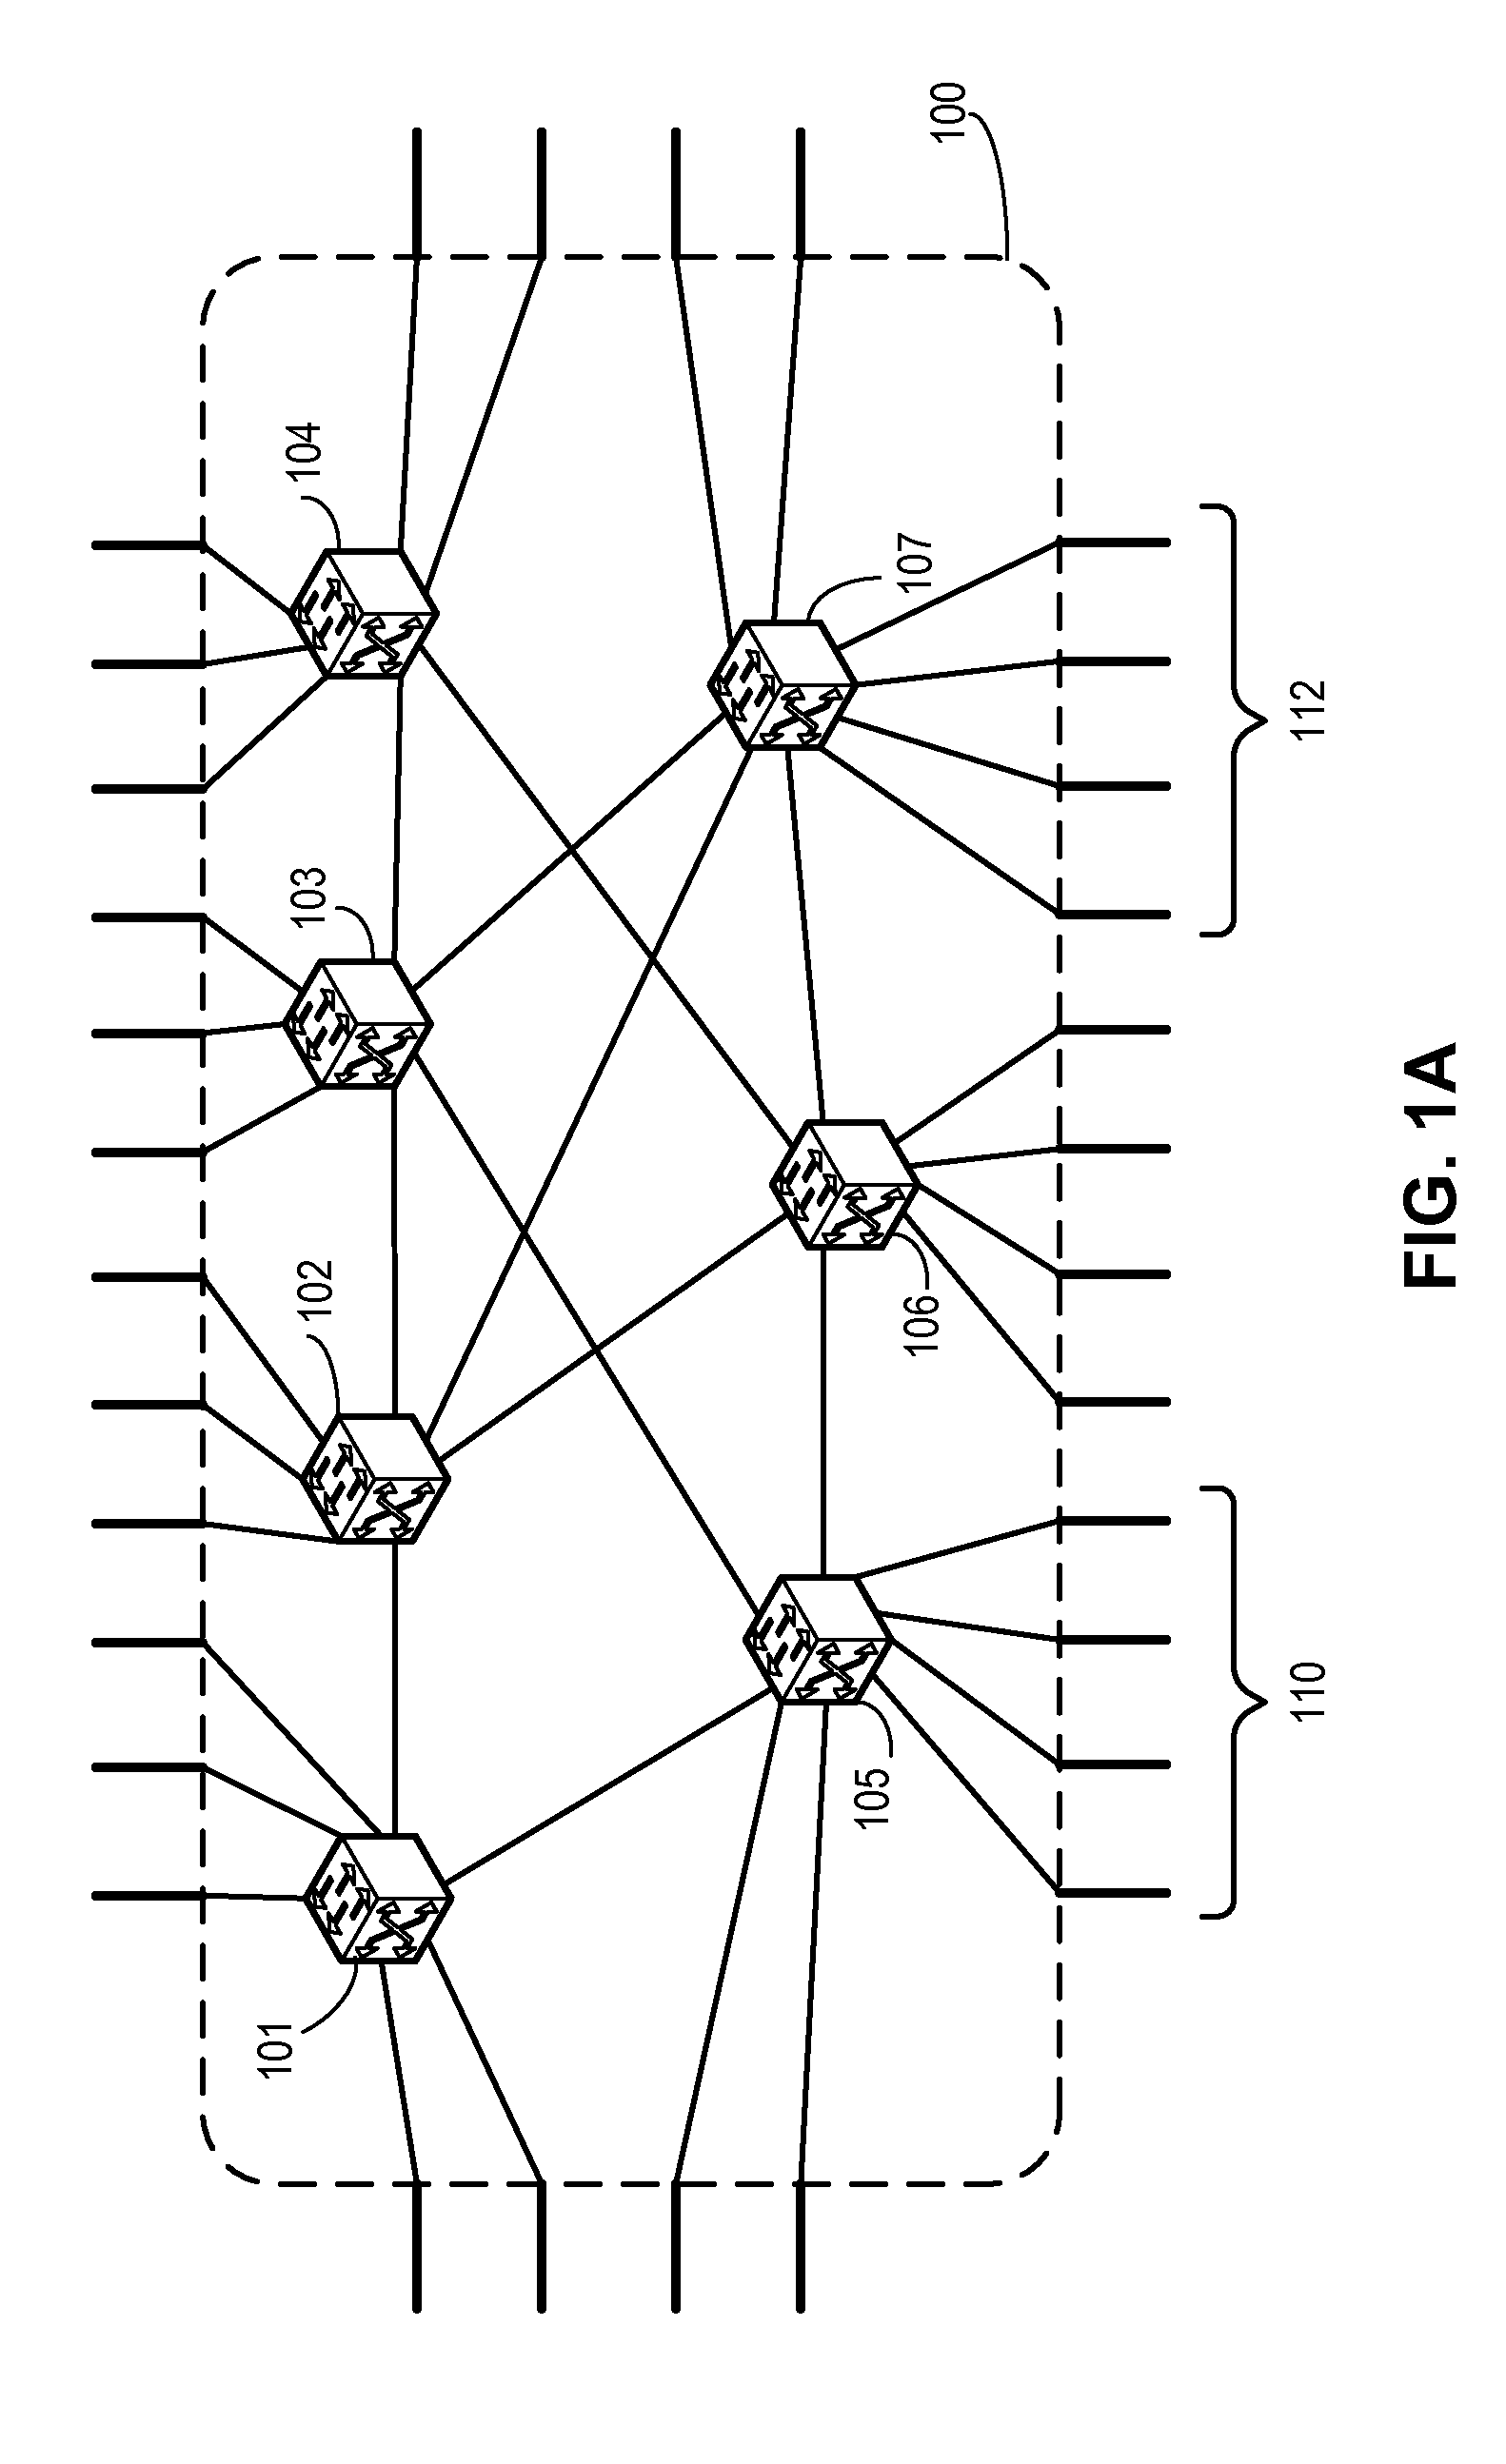 Fabric formation for virtual cluster switching